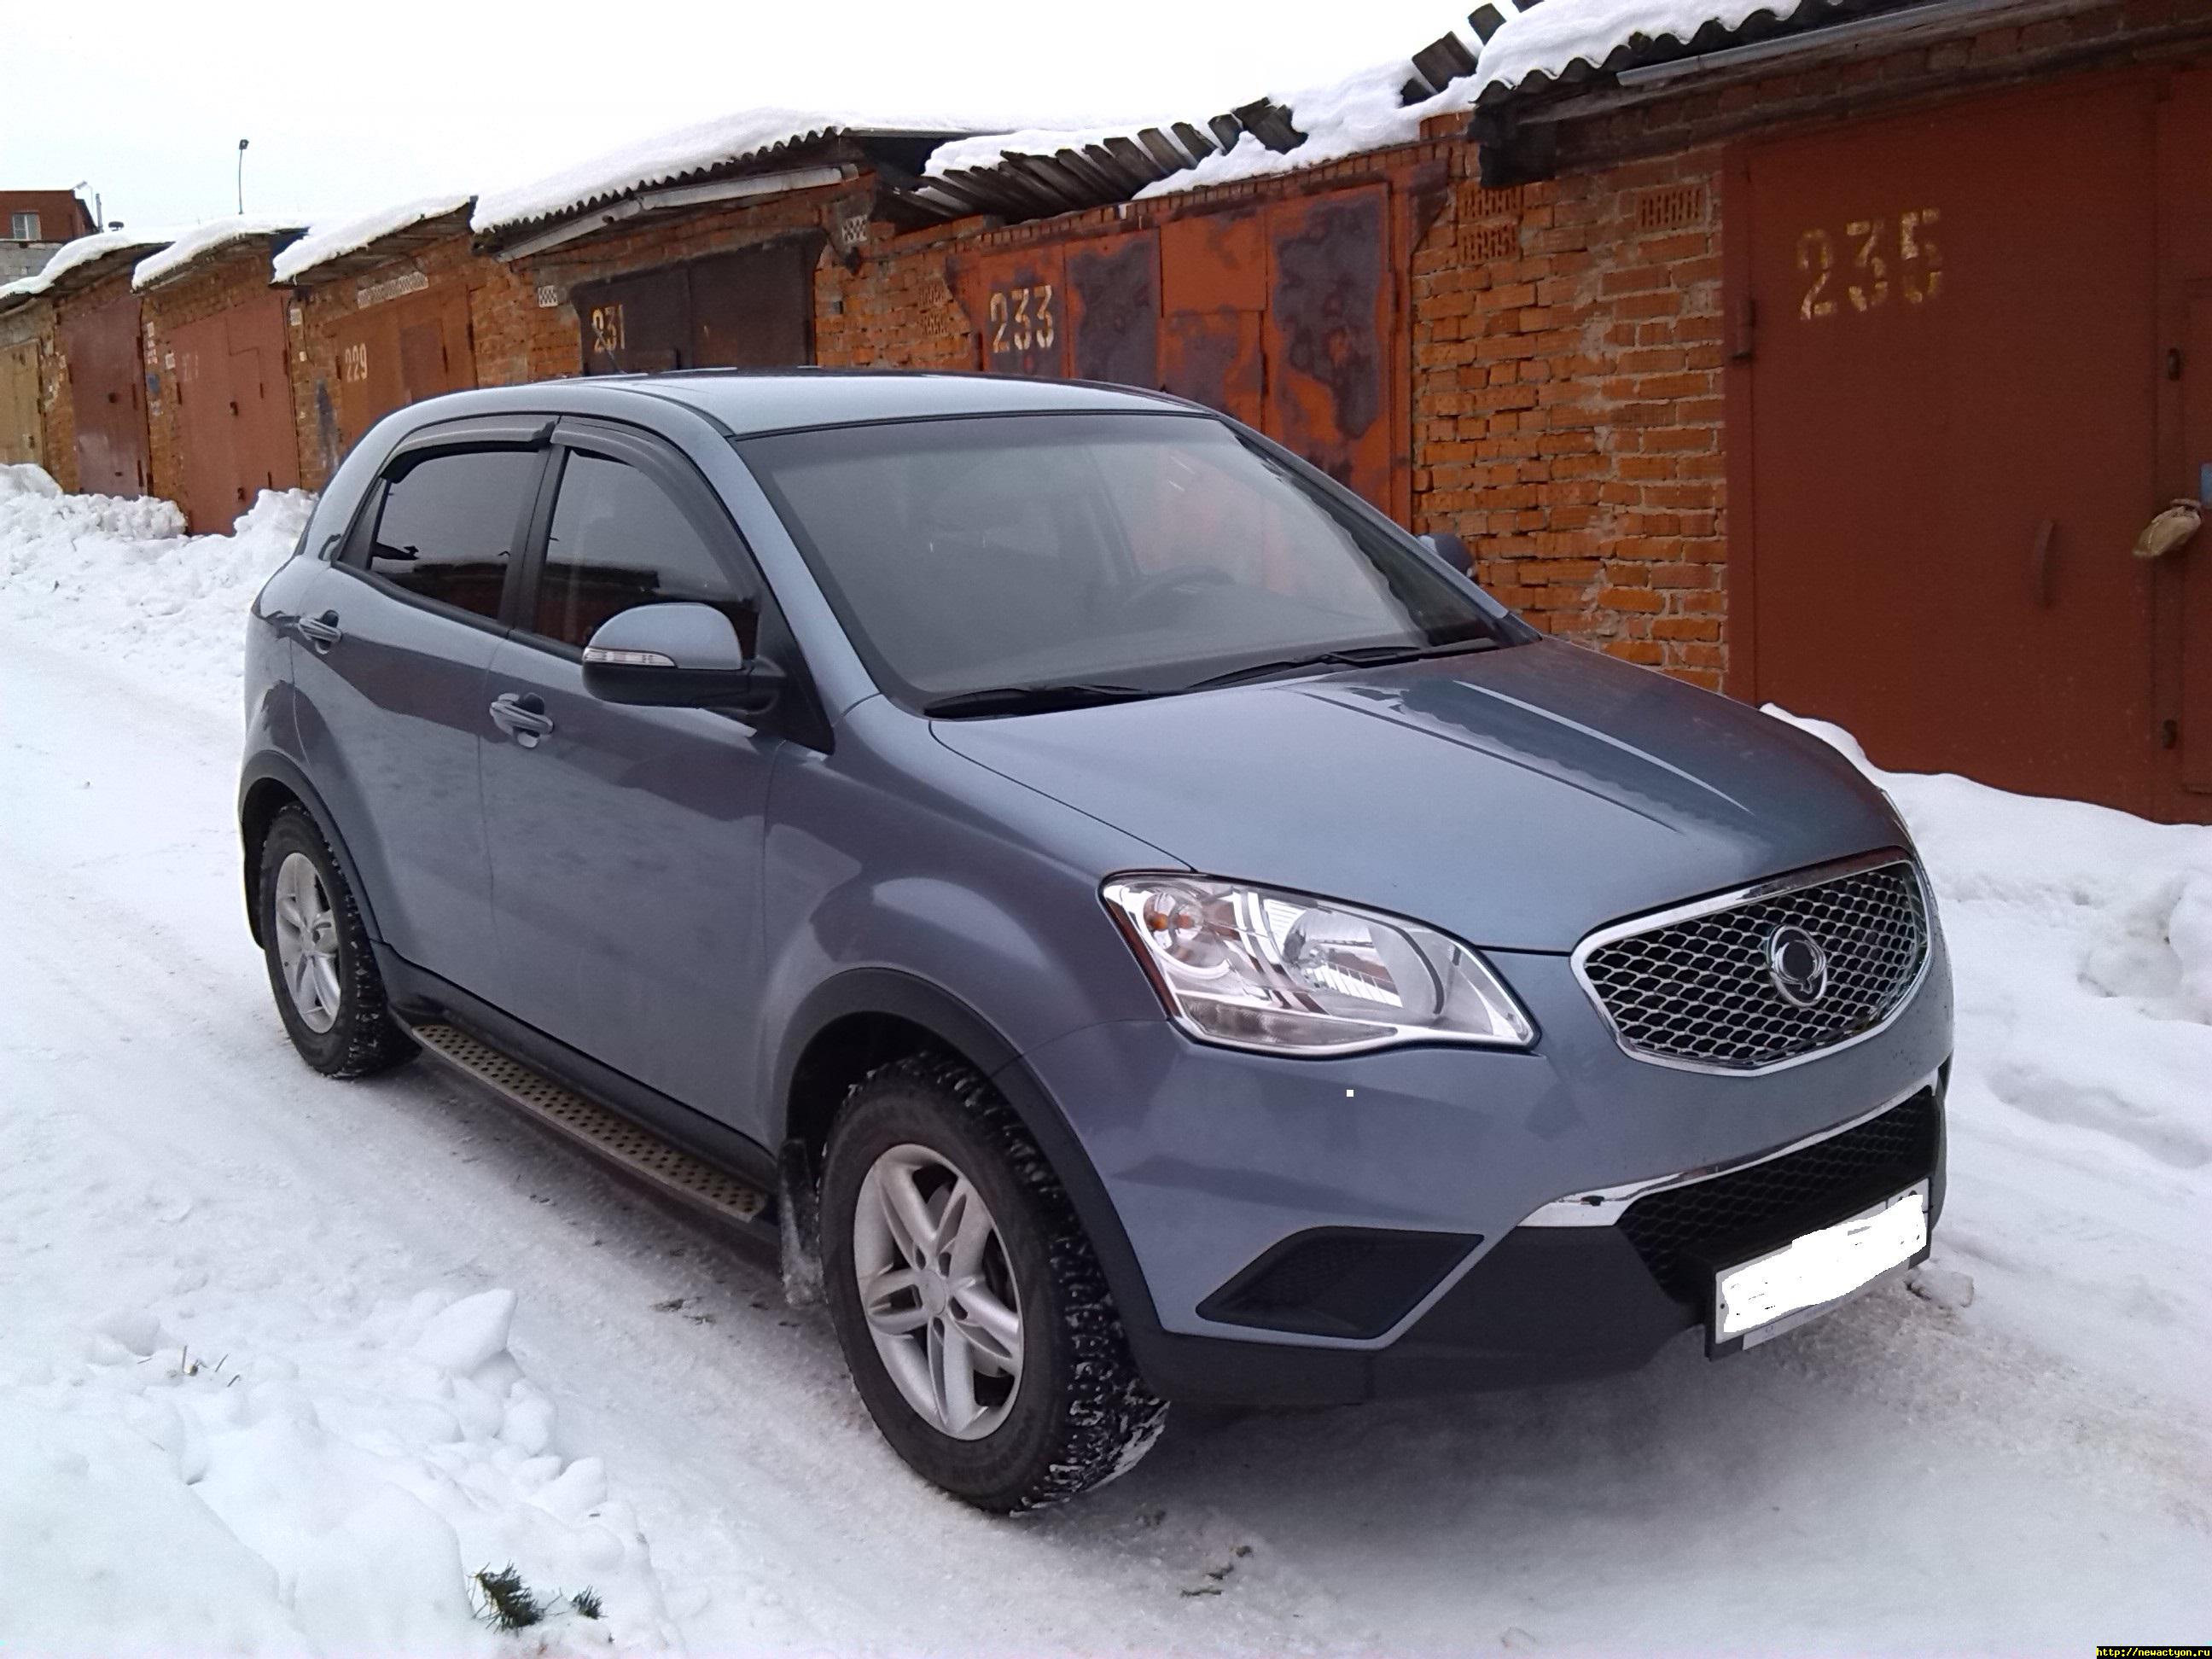 ssangyong new actyon,ssangyong new actyon отзывы,ssangyong new actyon отзывы владельцев,ssangyong new actyon цена,тест ssangyong new actyon,тест драйв ssangyong new actyon,фото ssangyong new actyon,ssangyong new actyon видео,ssangyong new actyon характеристики,ssangyong new actyon форум,ссангйонг актион нью,ссангйонг актион нью отзывы,ссангйонг нью актион цена,ссангйонг актион нью видео,ссангйонг нью актион форум,ссангйонг нью актион тест,ссангйонг нью актион клуб,ссангйонг актион нью фото,новый актион,новый актион отзывы,новый саньенг актион,новый санг енг актион,санг йонг новый актион,новый актион санг янг,новый саненг актион,новый актион цены